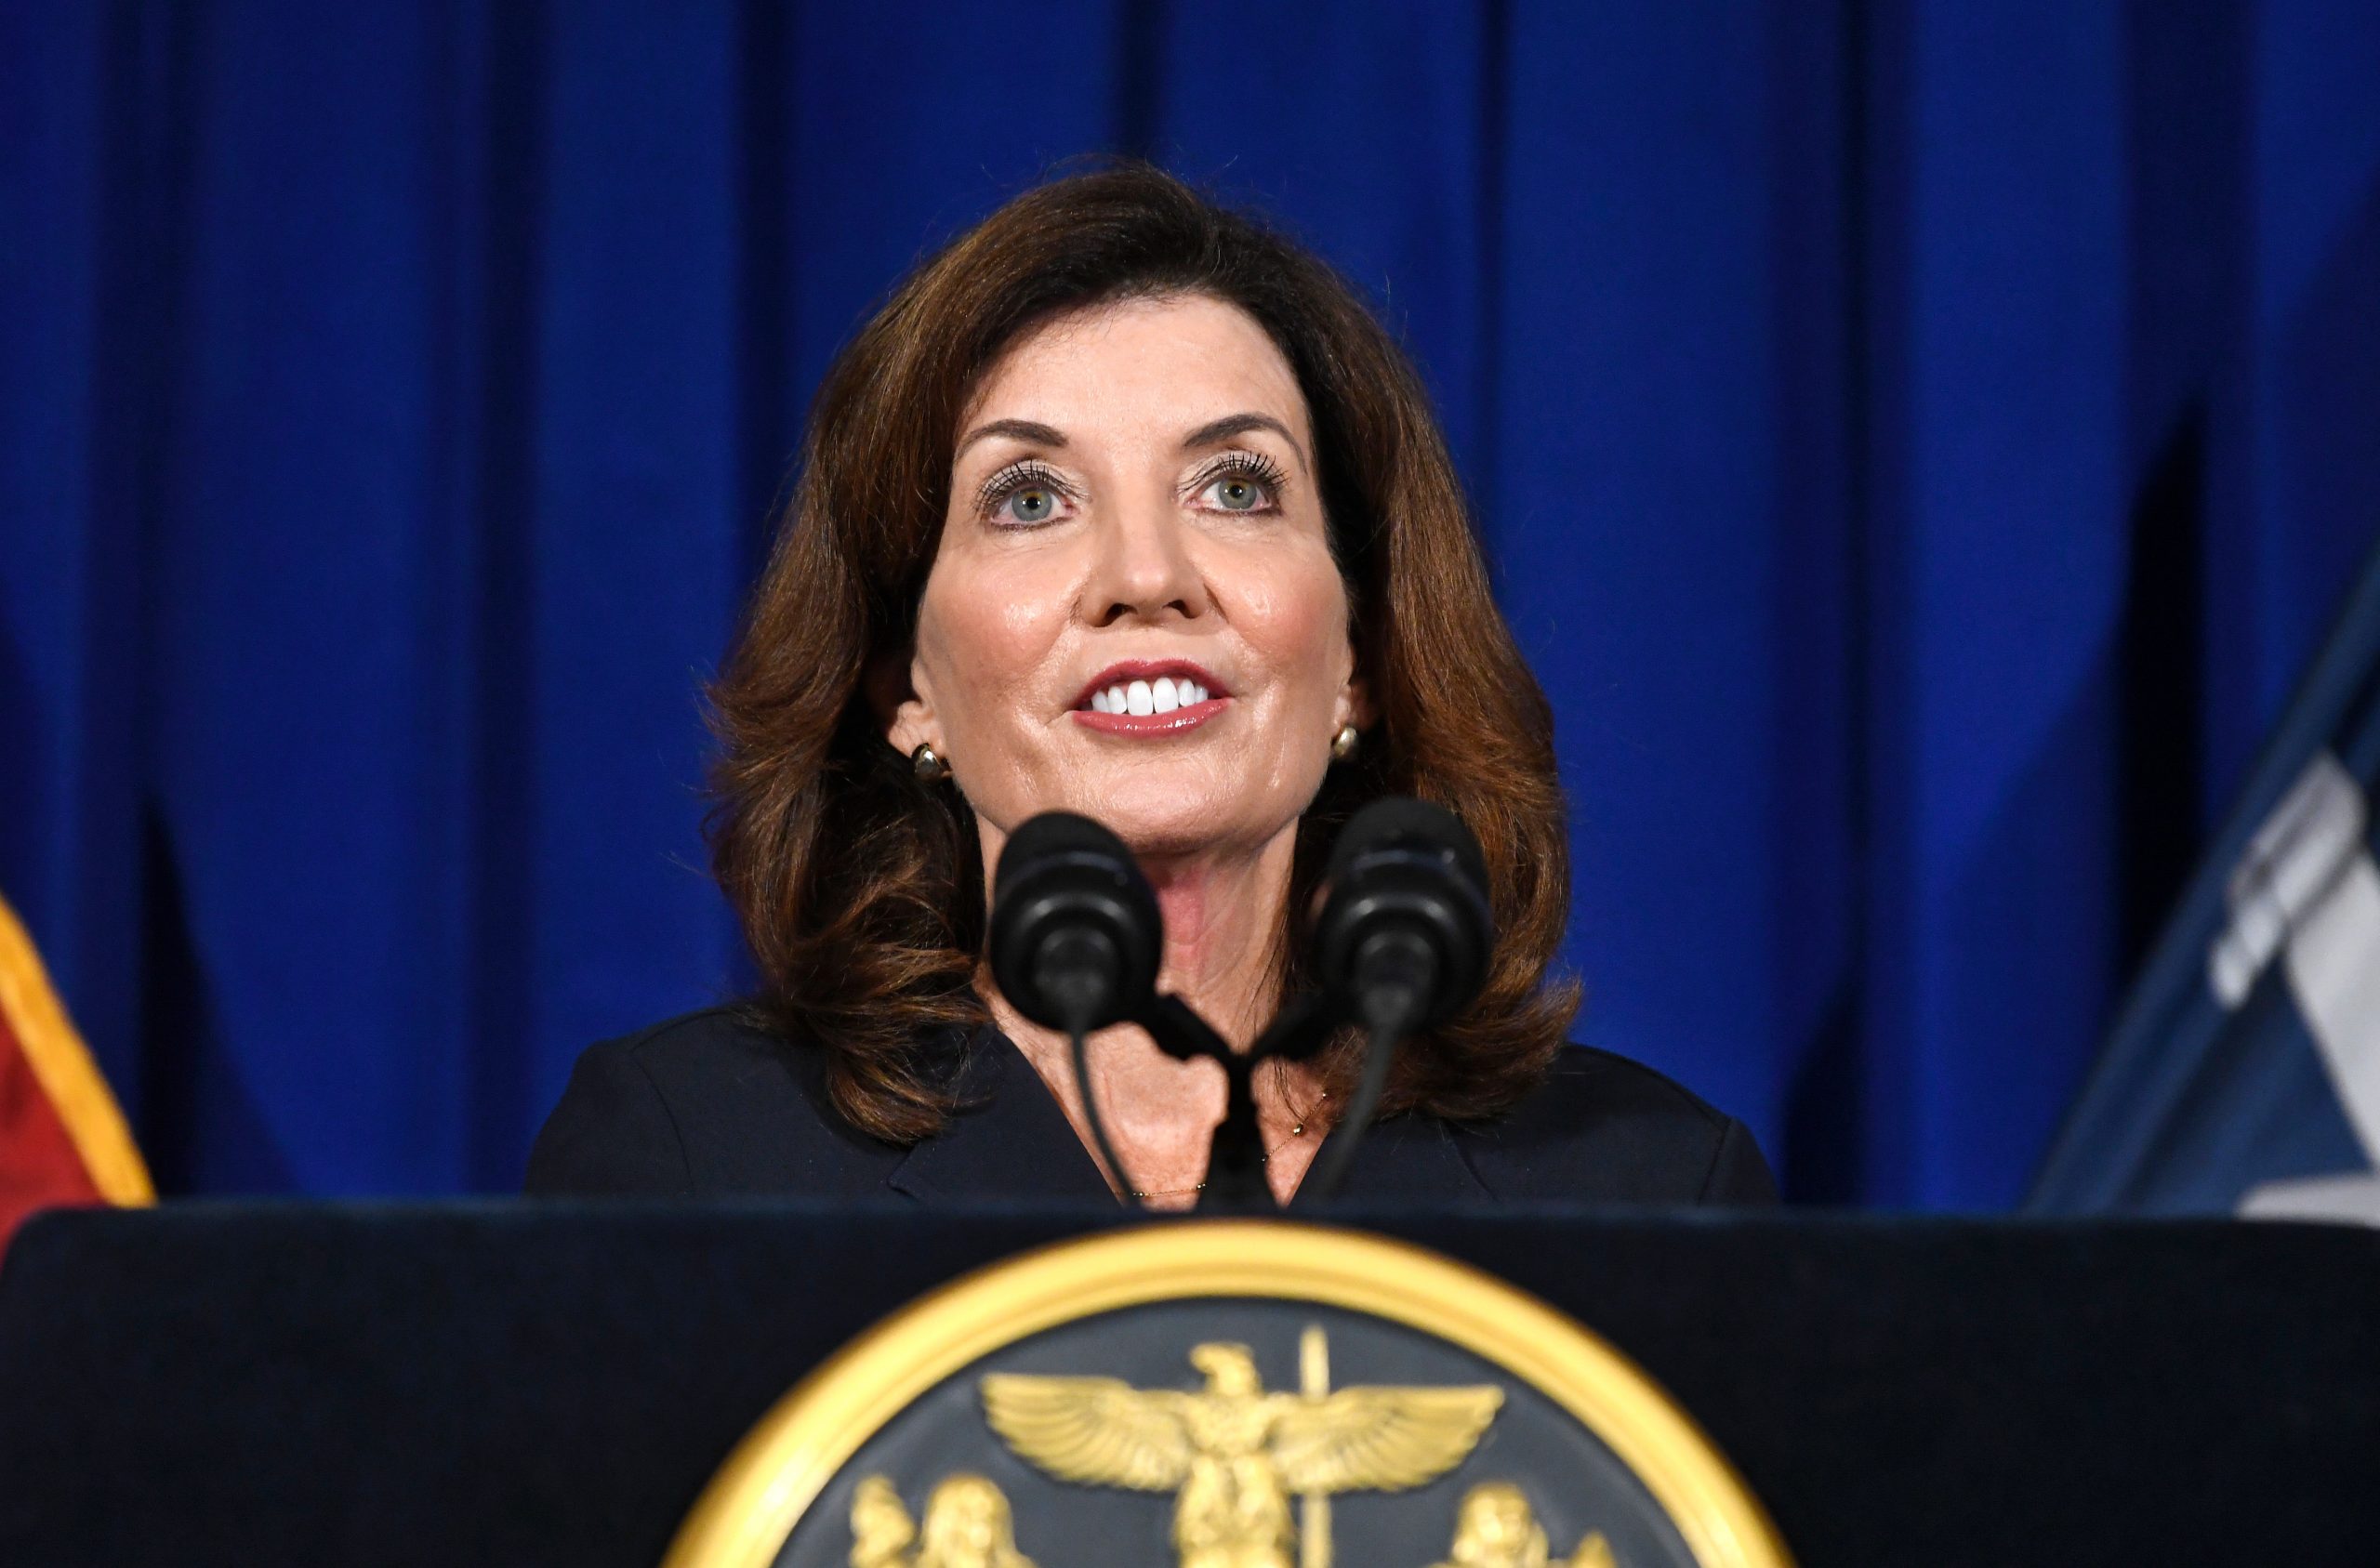 With 9 women governors, US ties record